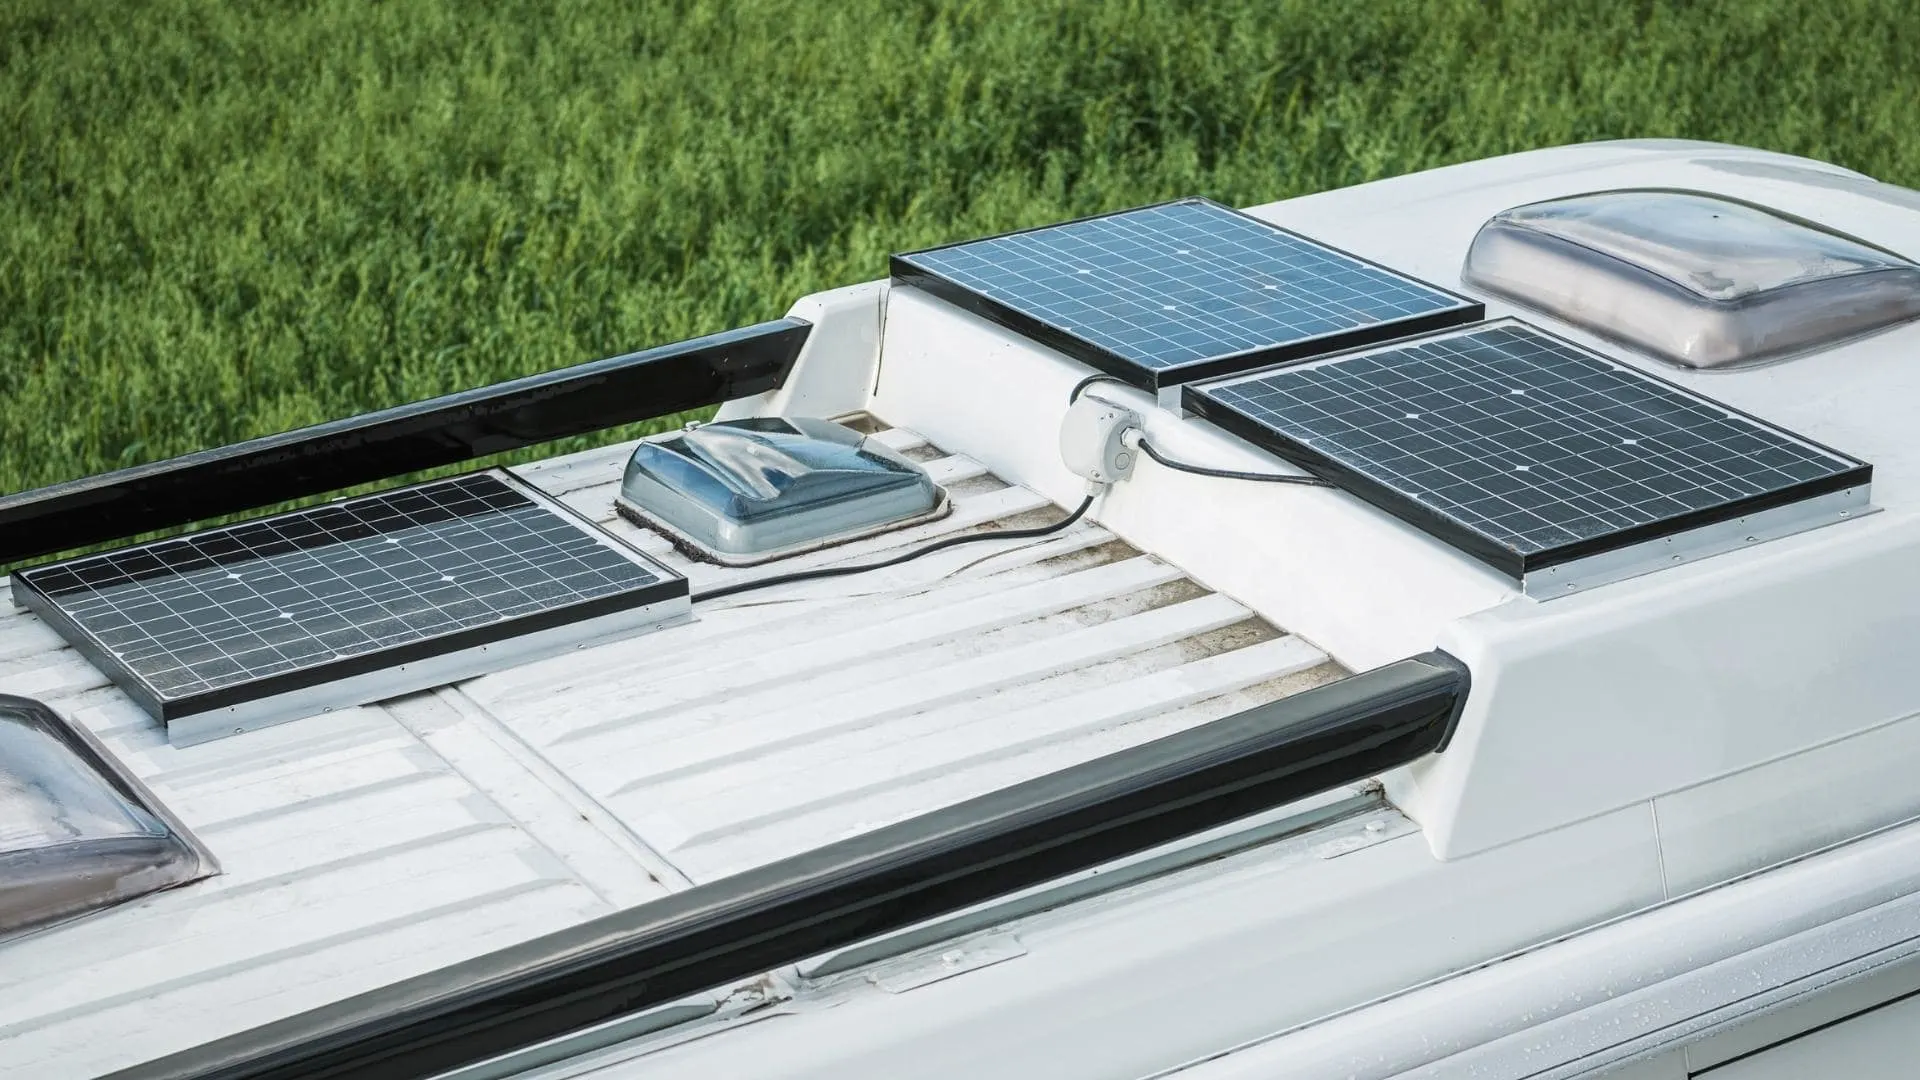 Photo of three solar panels wired in series on the roof of an RV